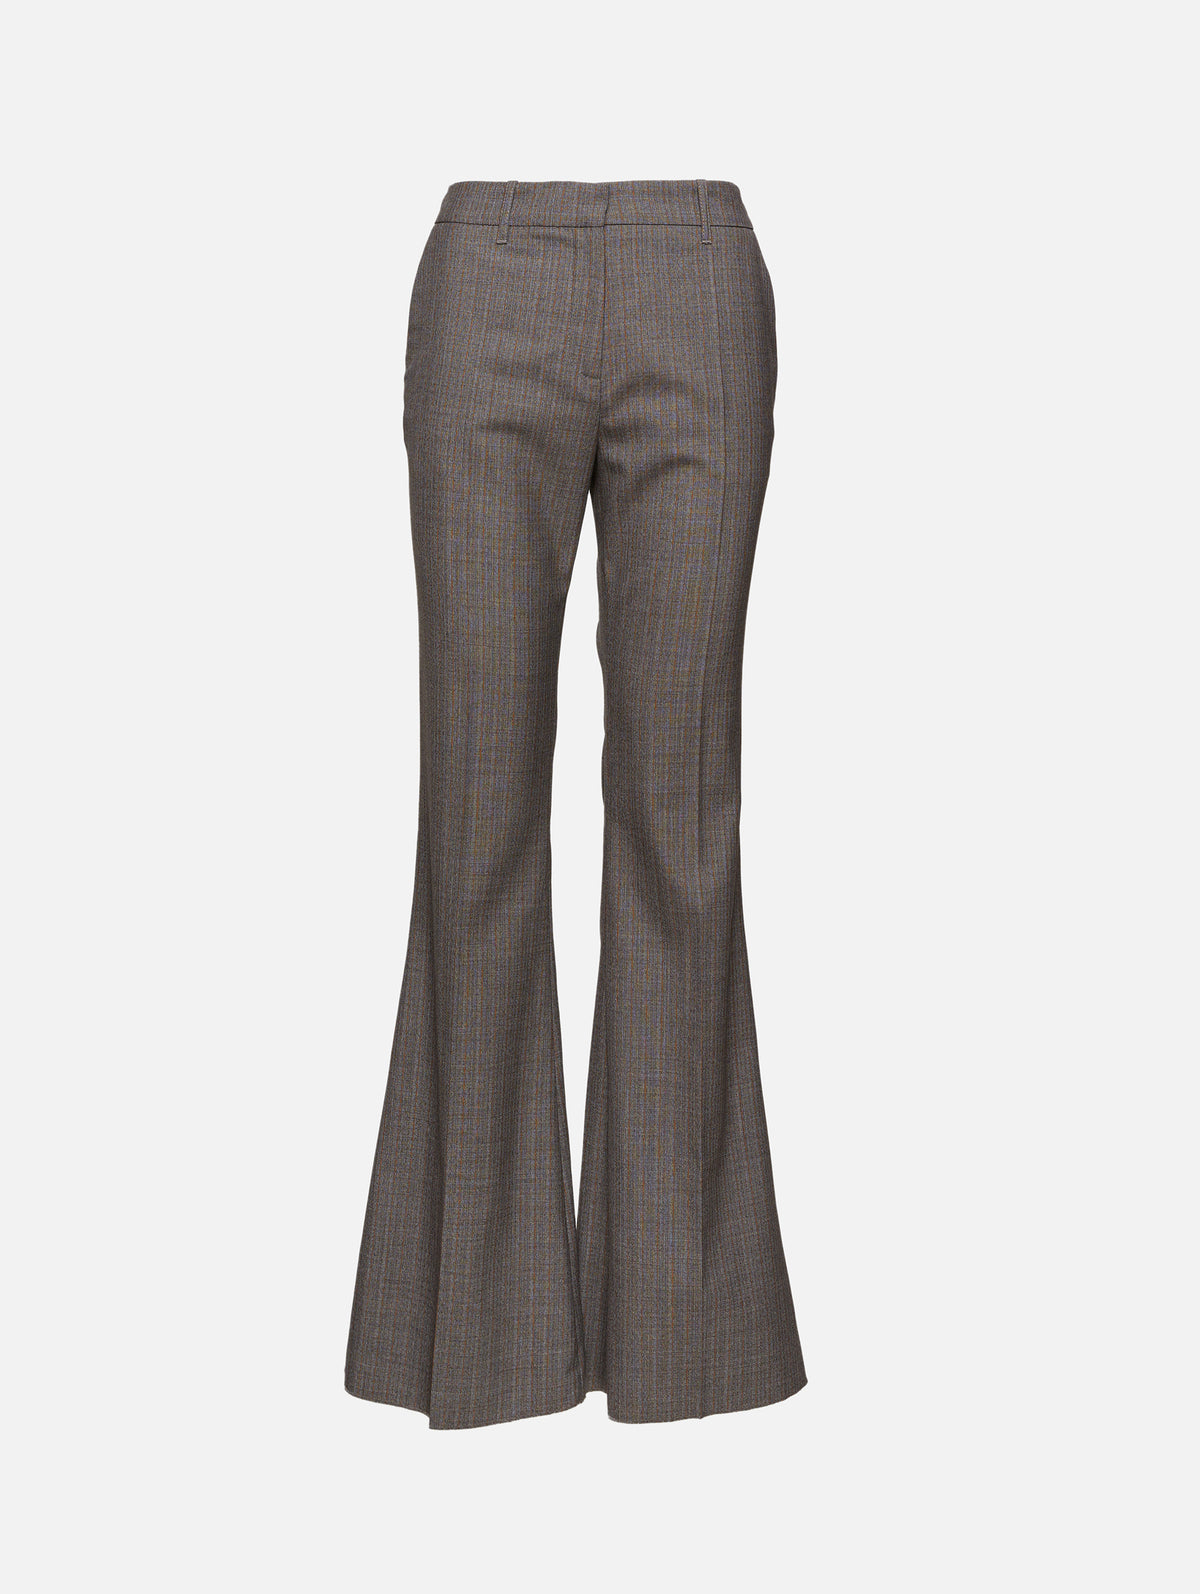 view 1 - Wool Suit Pant